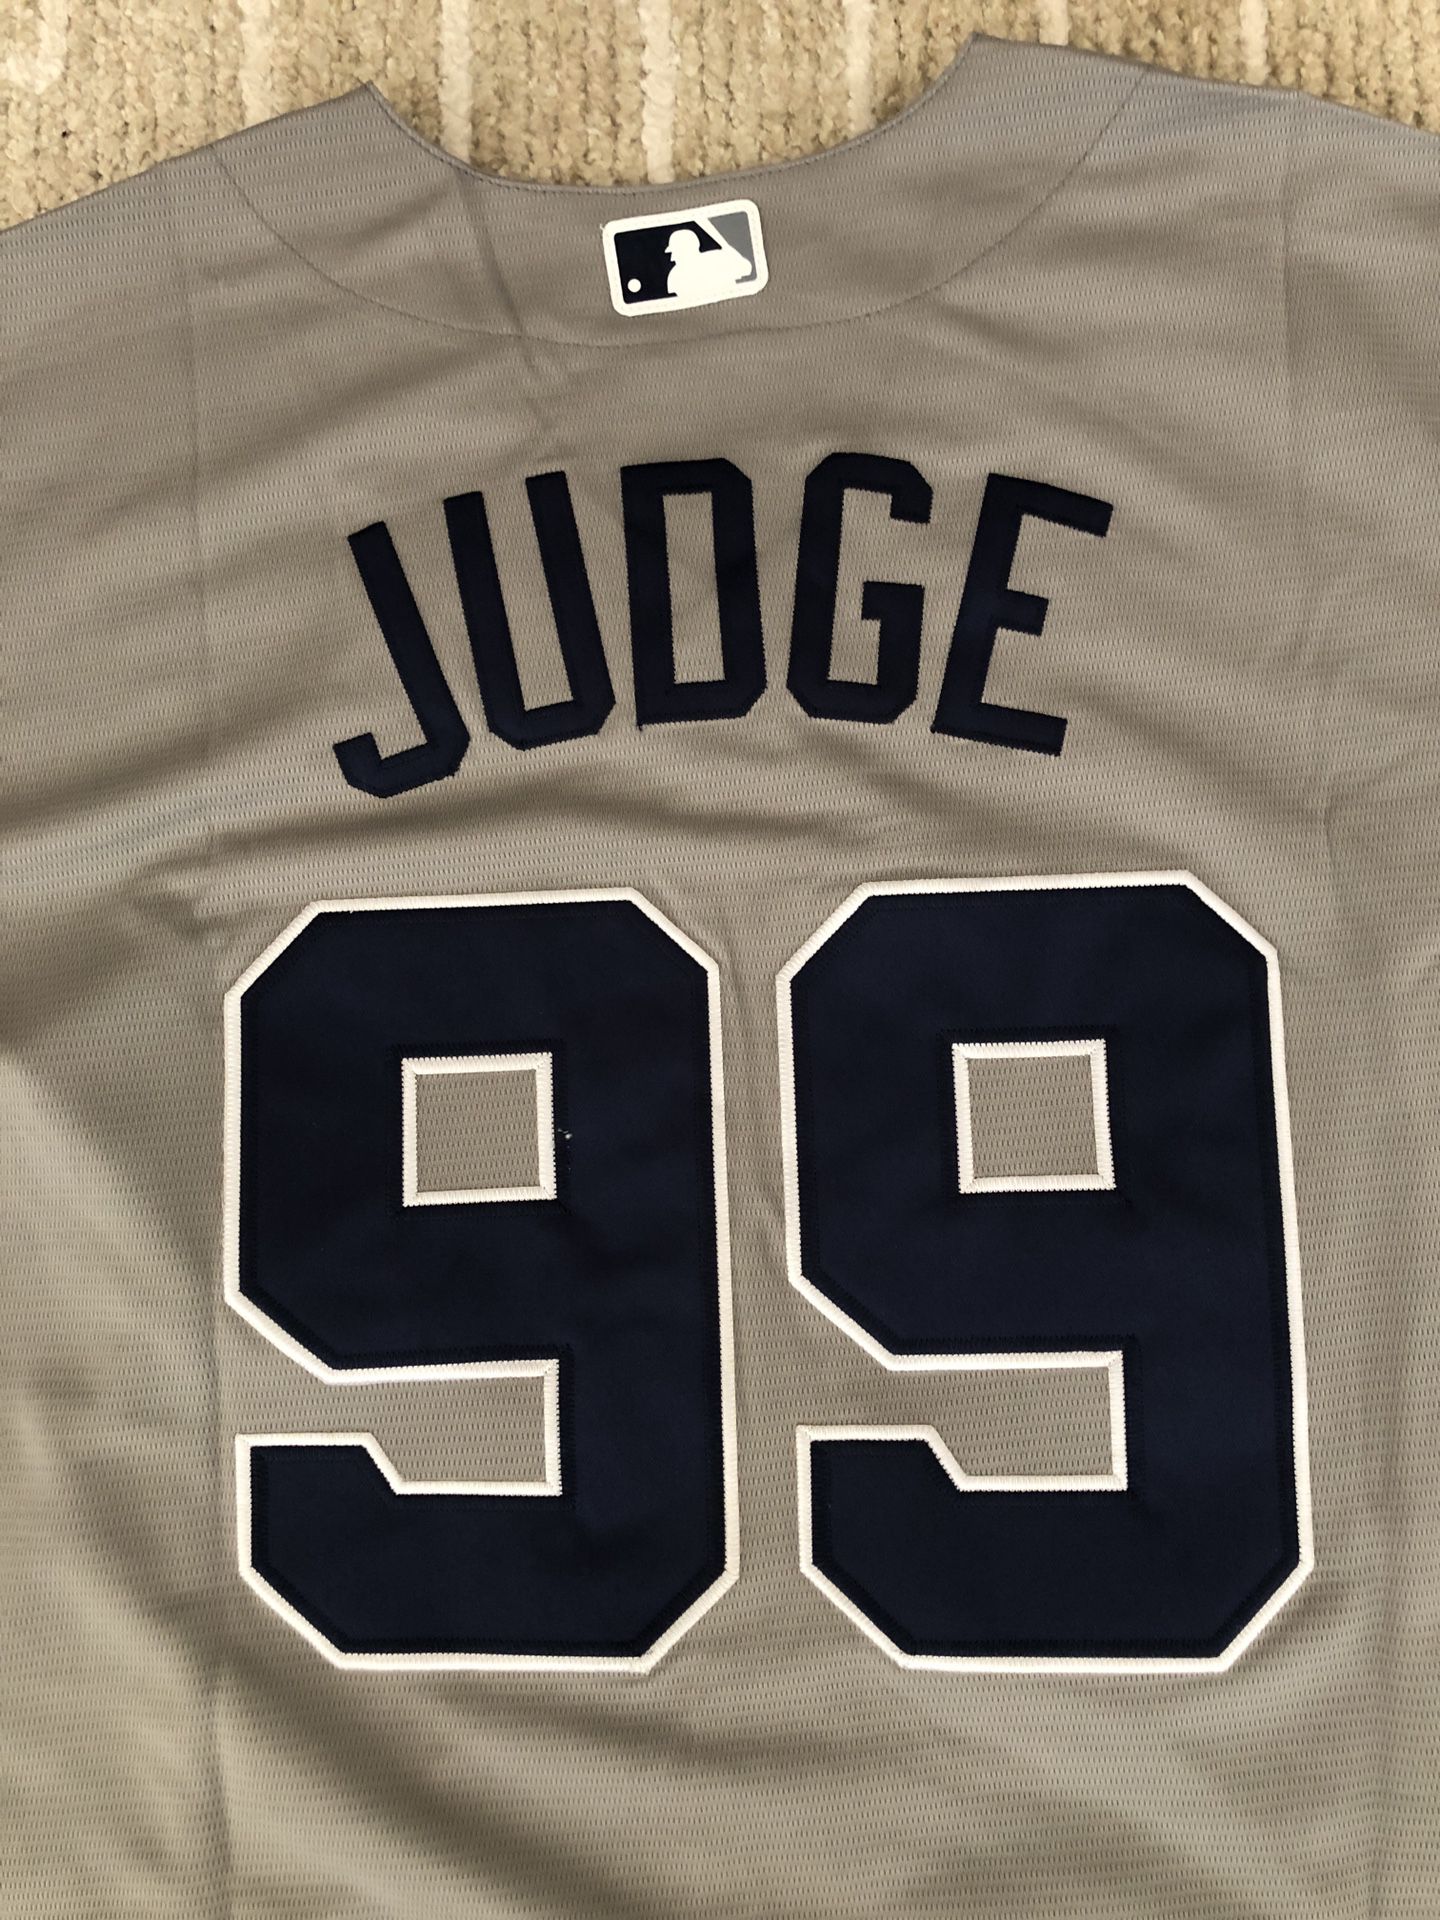 New York Yankees Aaron Judge Jersey Grey White M L for Sale in Norwalk, CA  - OfferUp